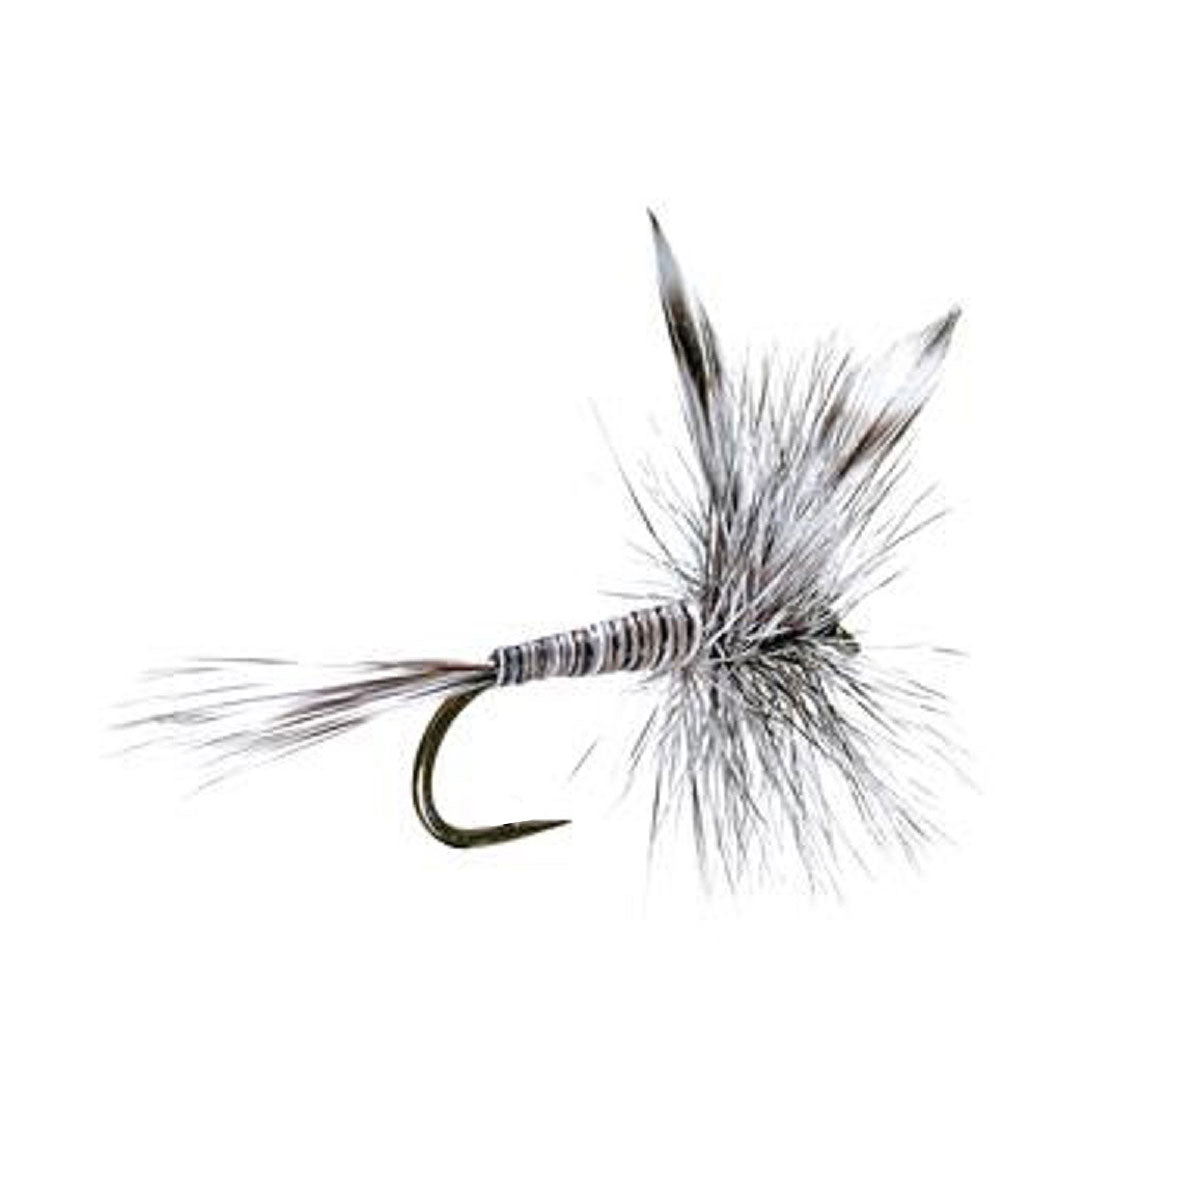 Barbless Mosquito Classic Trout Dry Fly Fishing 1 Dozen Flies - Hook Size 16